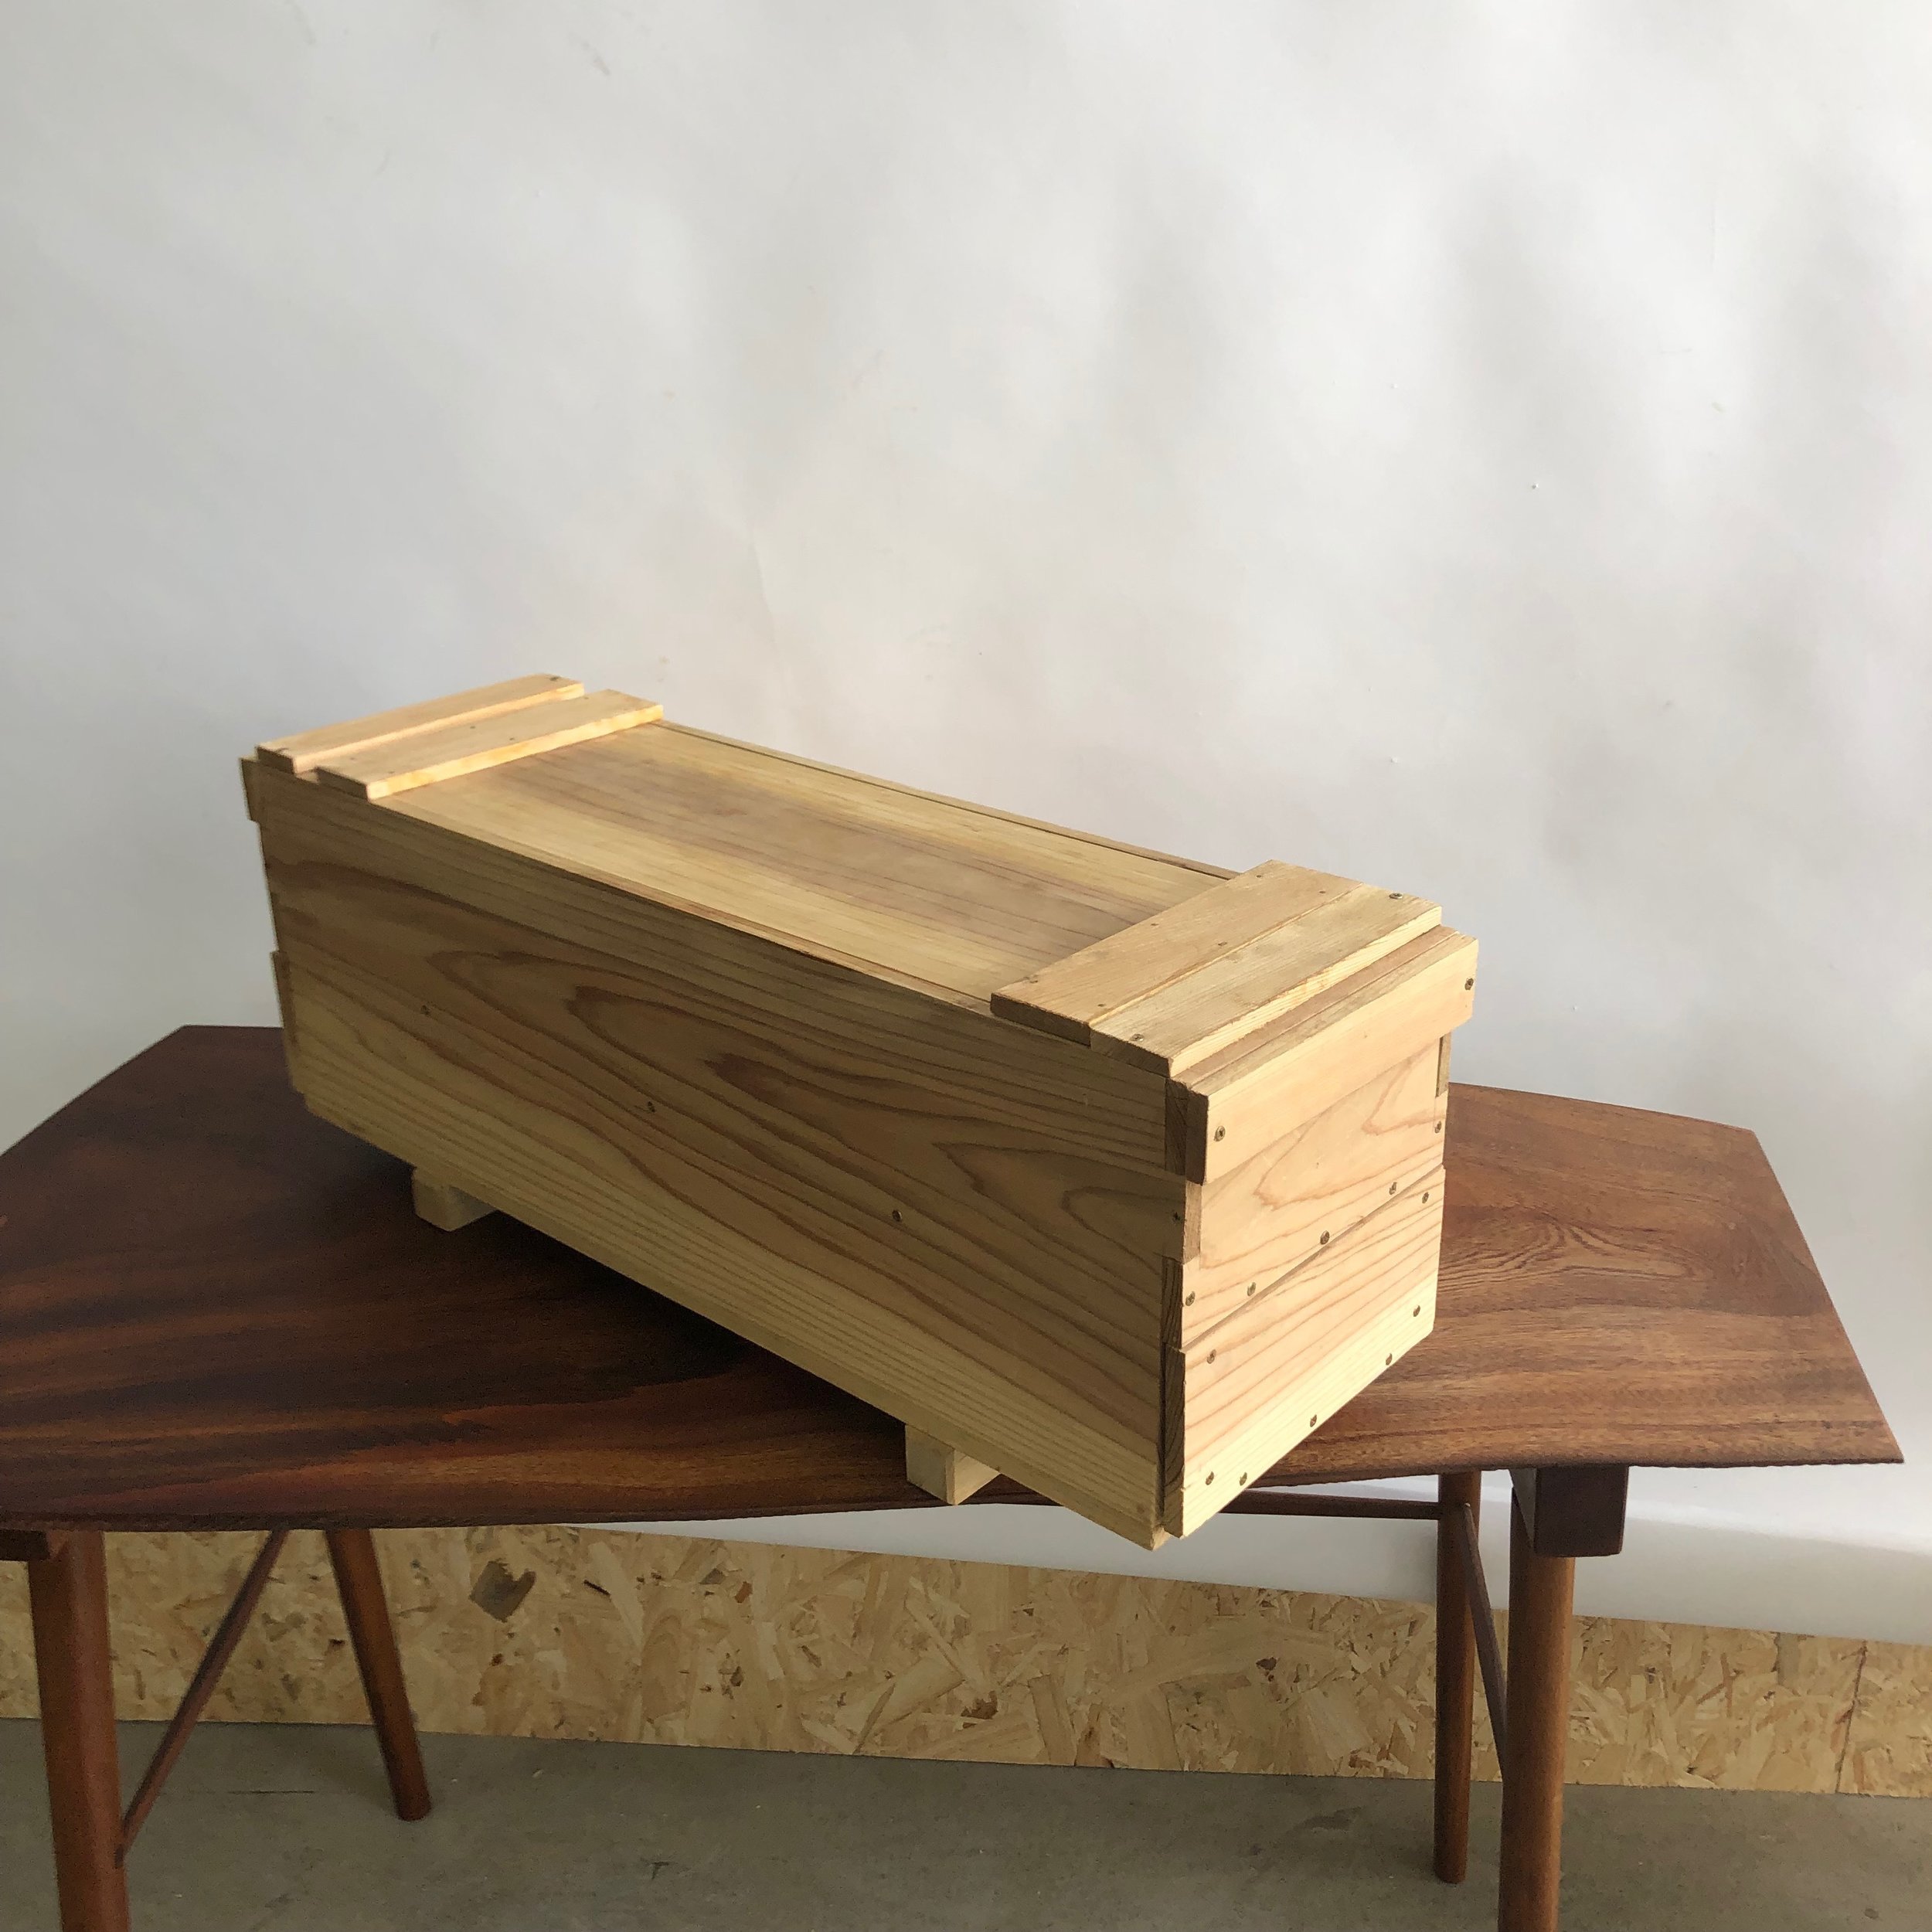 Japanese Woodworking Introduction [Class in NYC] @ Mokuchi Woodworking  Studio